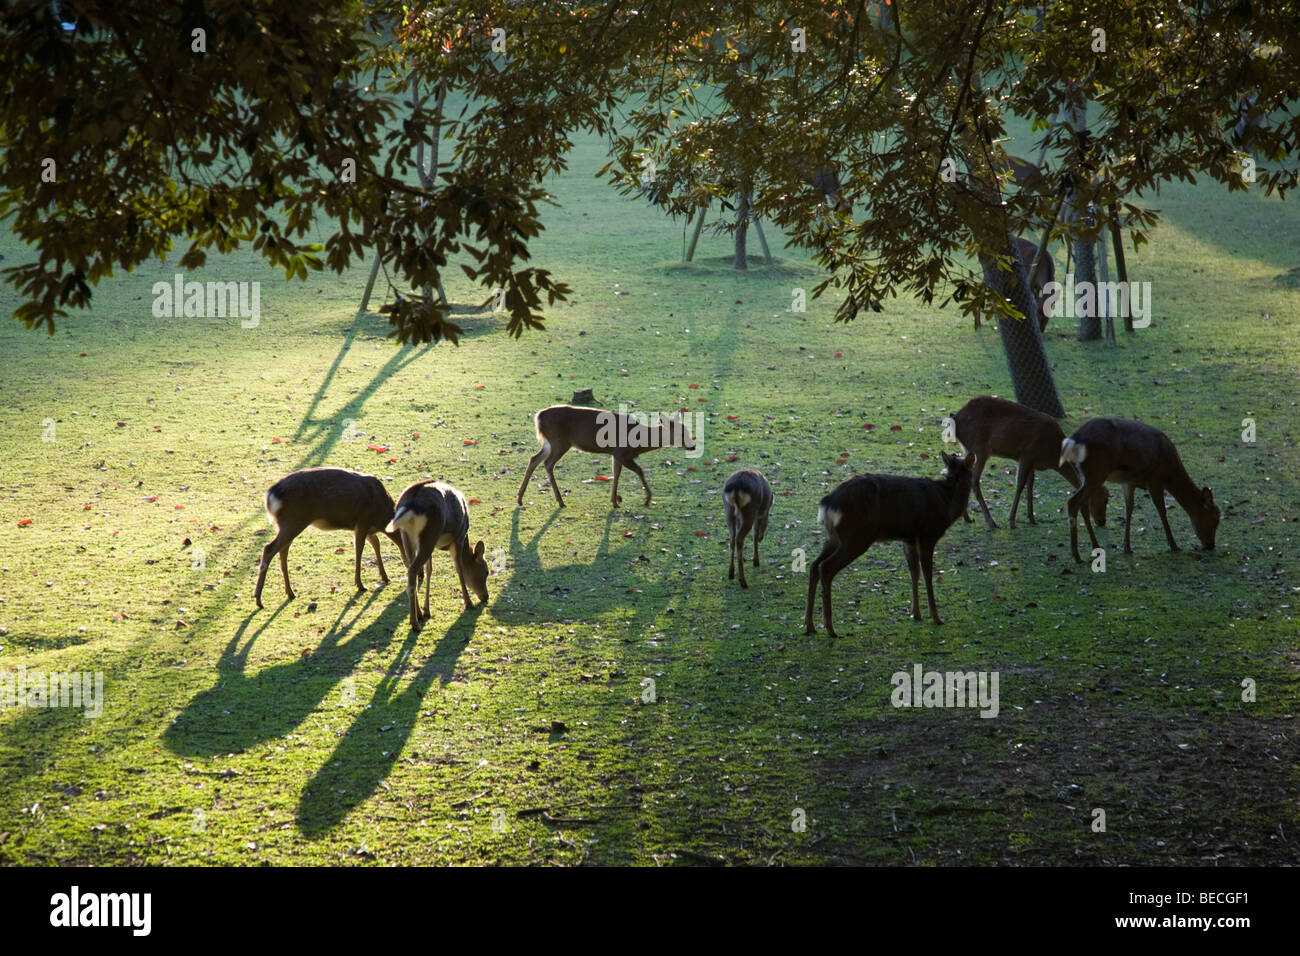 Nara Park, sometimes called Nara Deer Park, is a large, pleasant space in central Nara Stock Photo